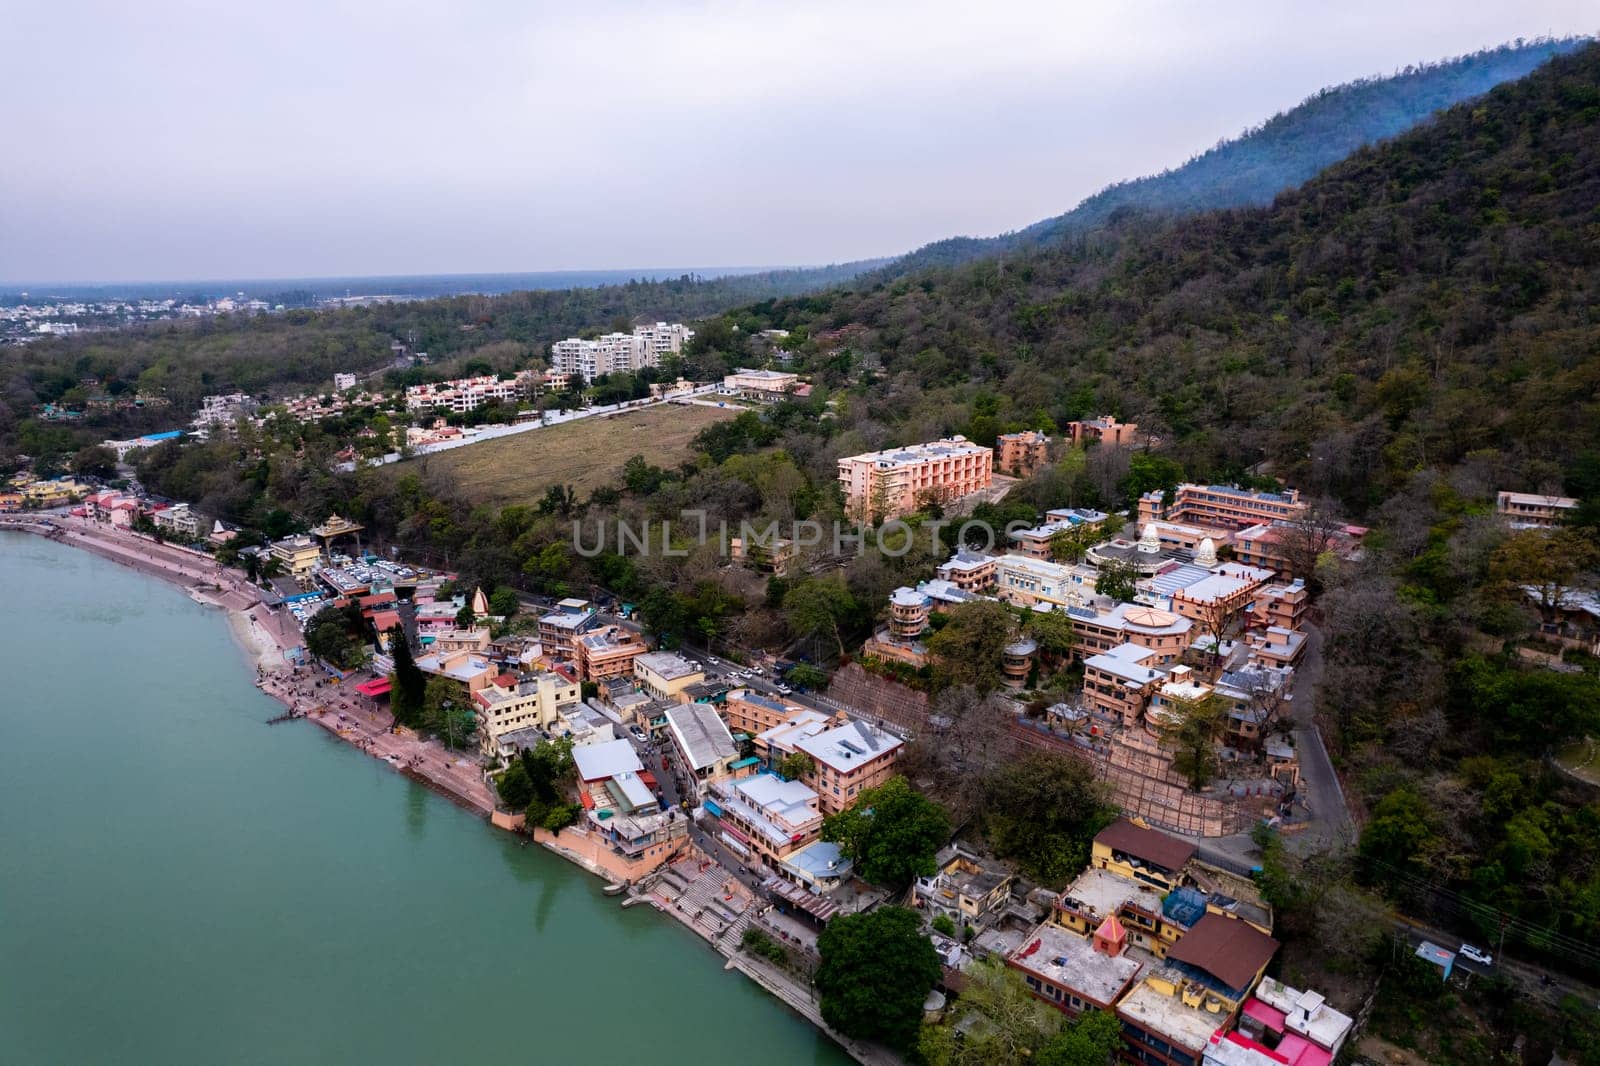 aerial drone shot of buildings apartments and temples on bank of ganga in the middle of dense trees on himalaya mountains in rishikesh haridwar in uttarakhand by Shalinimathur